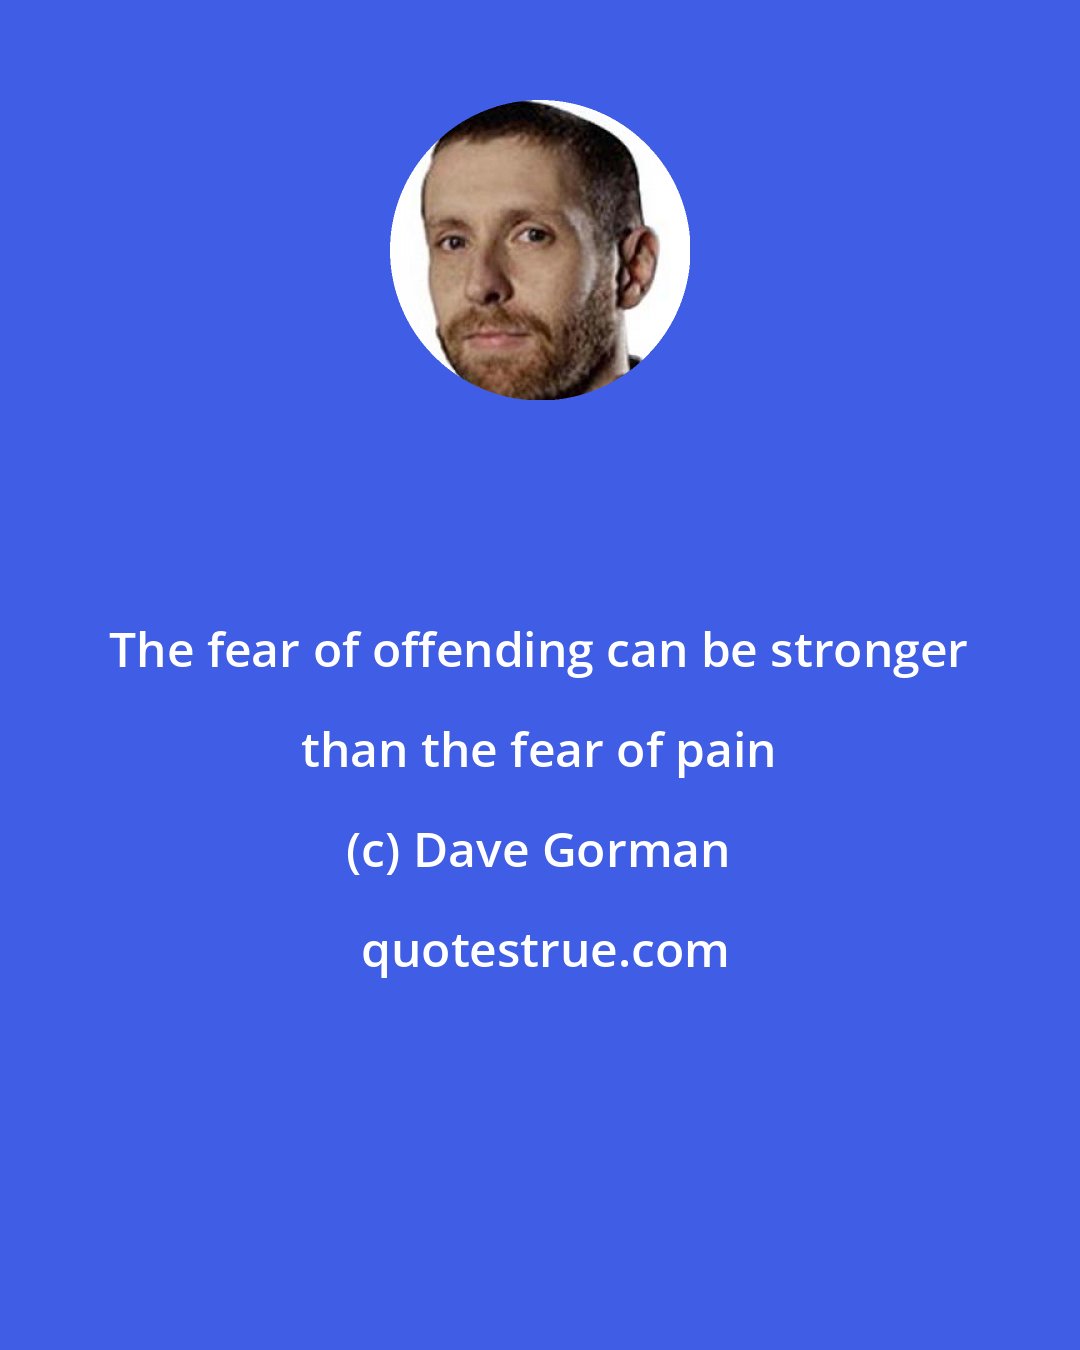 Dave Gorman: The fear of offending can be stronger than the fear of pain